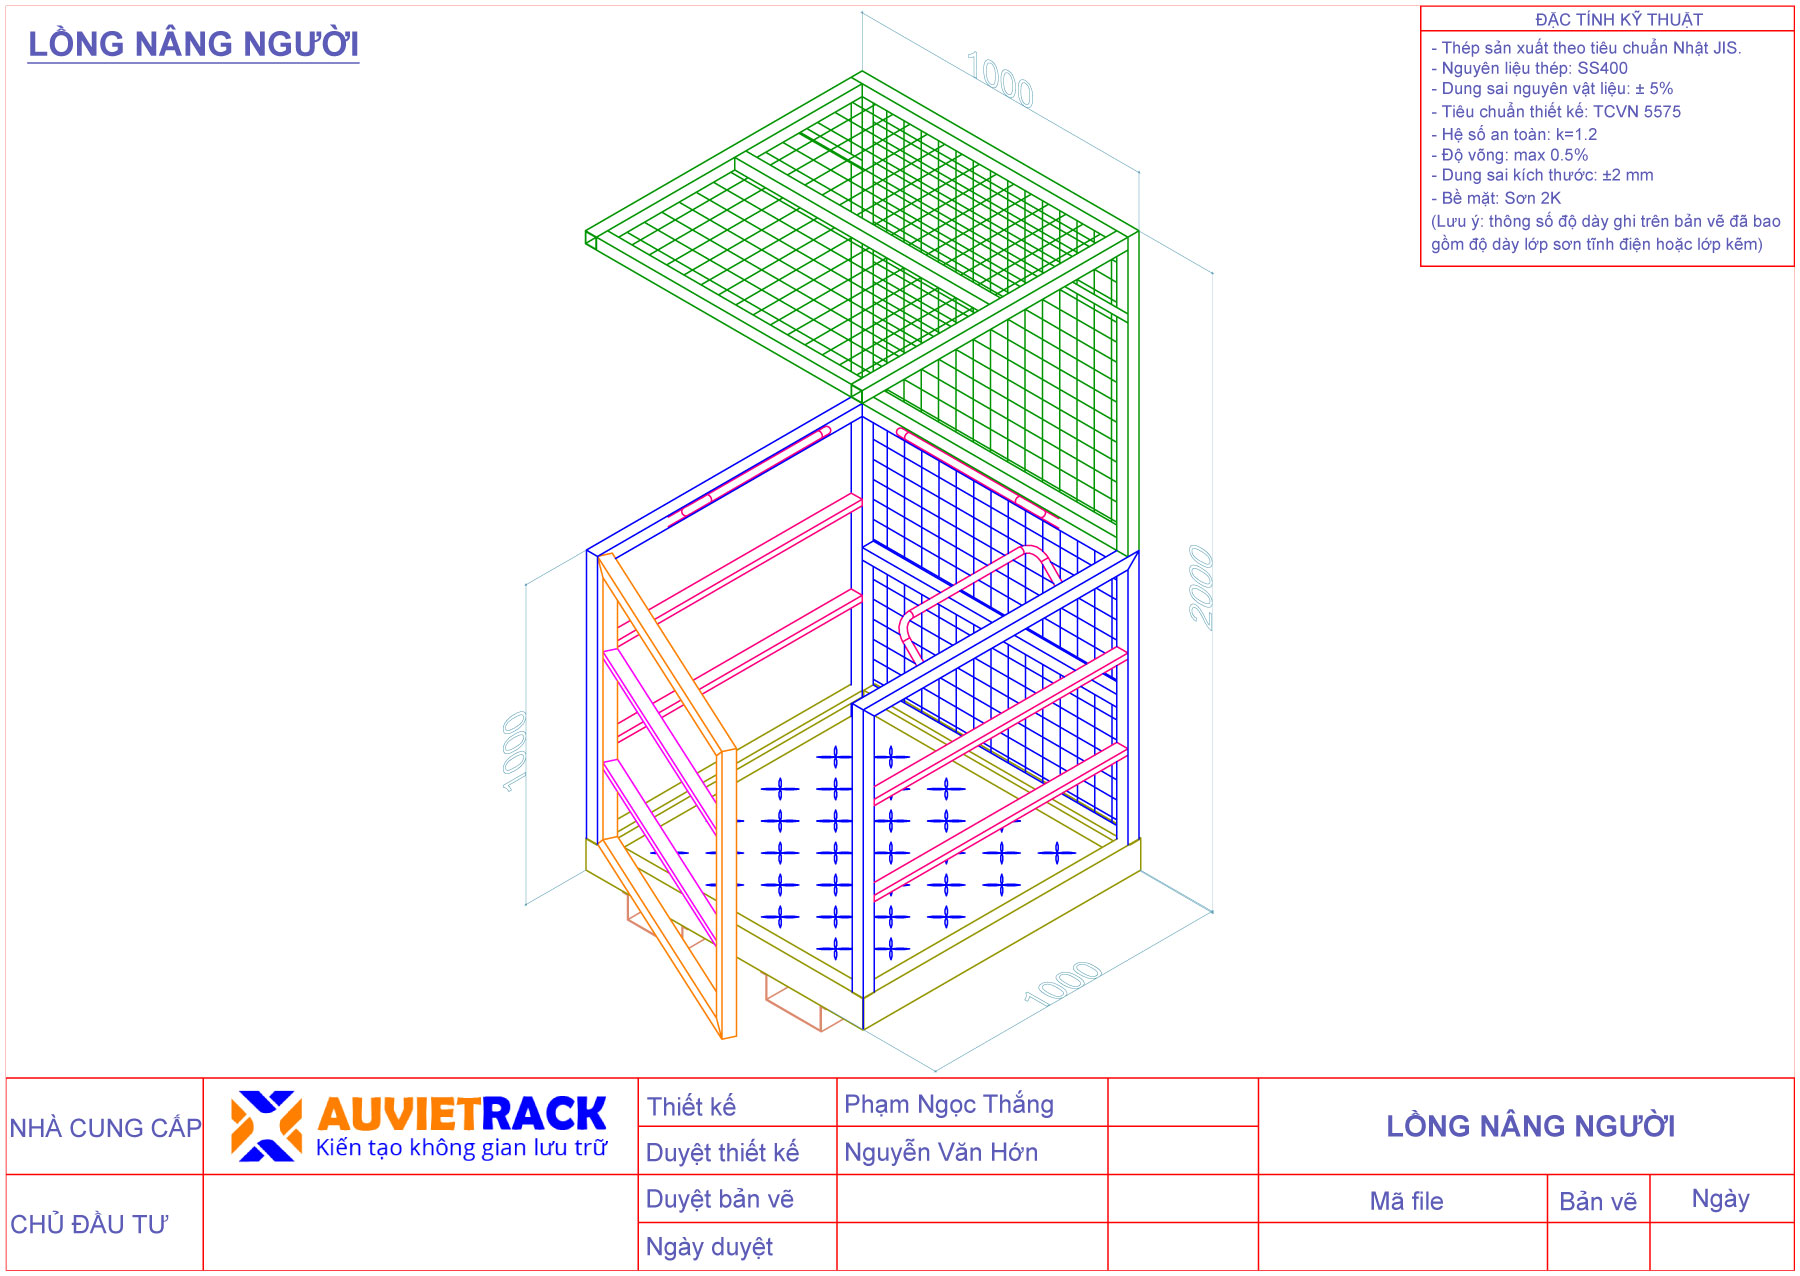 3D drawing of forklift saffety cage- Au Viet Rack